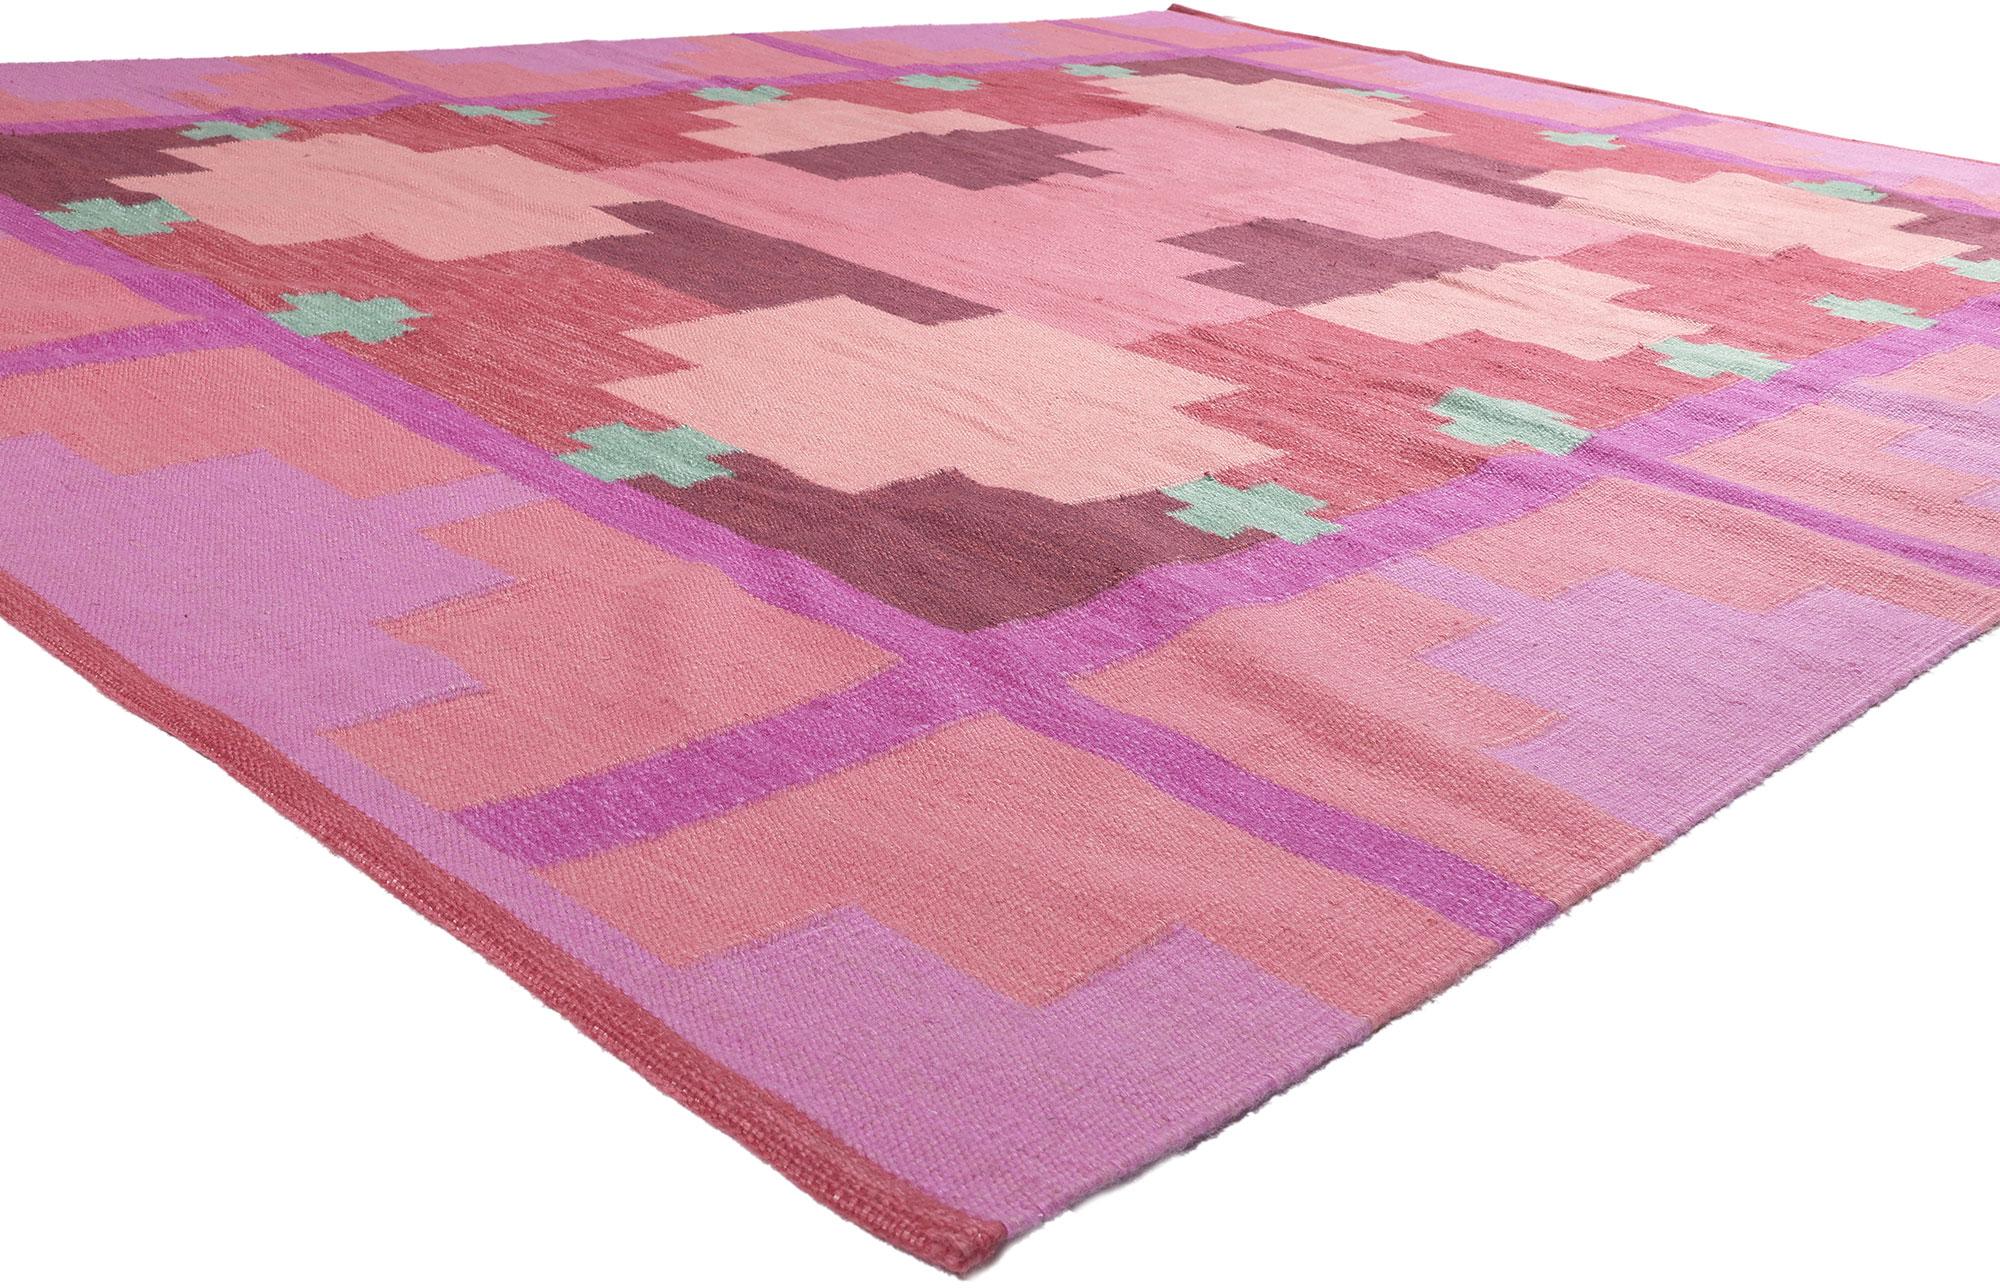 30963 New Swedish Inspired Kilim Rug, 09'01 x 11'10. Showcasing the bolder side of Scandinavian design, this handwoven Swedish style kilim rug is a captivating vision of woven beauty. The eye-catching geometric design and vibrant colorway woven into